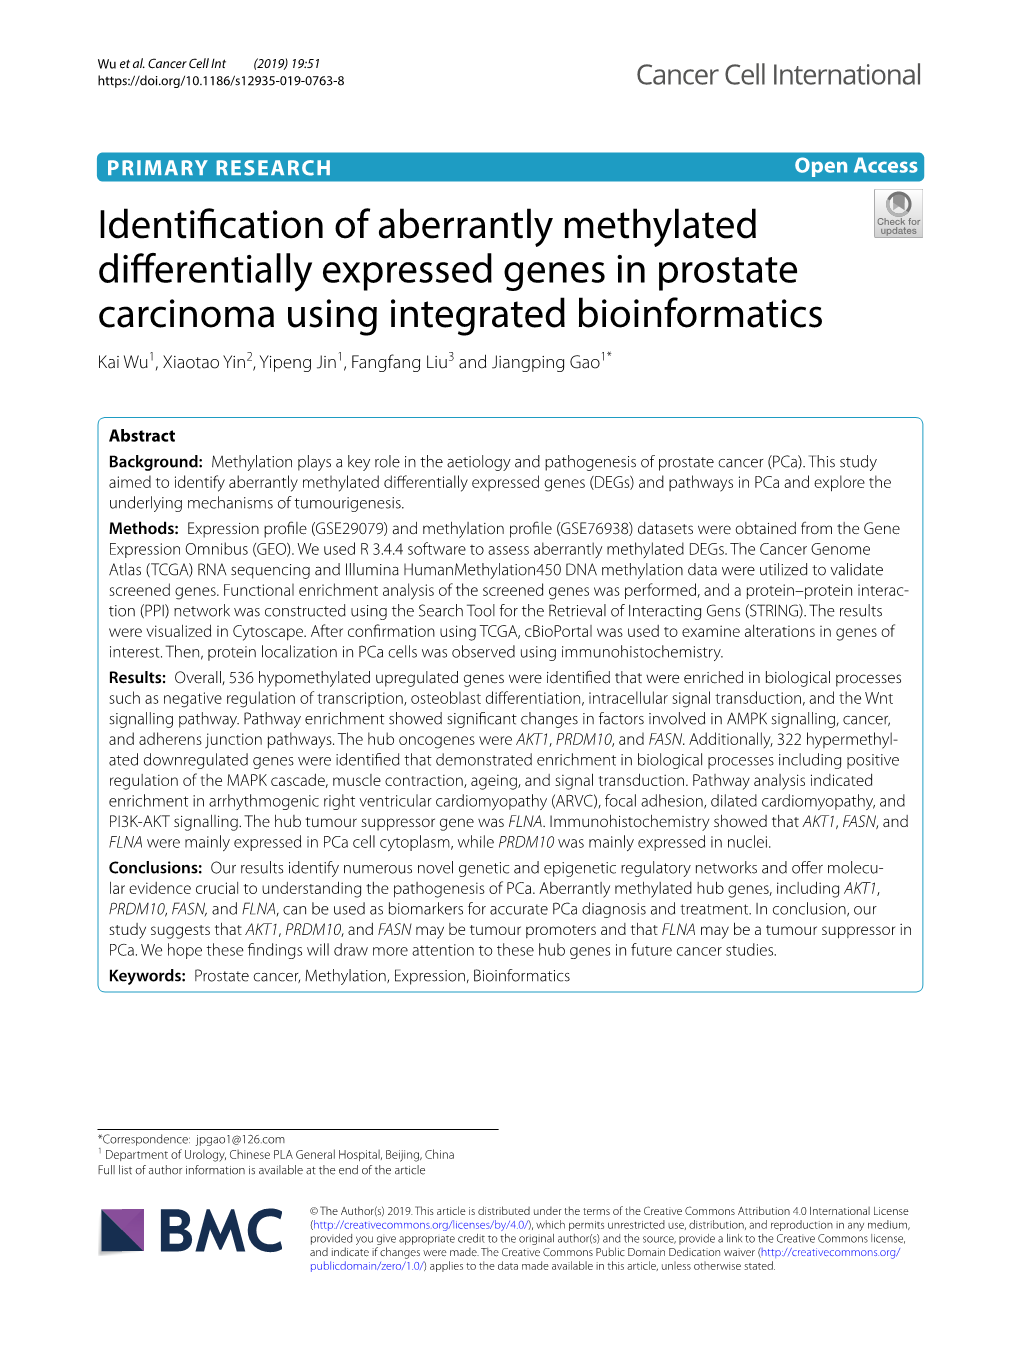 Identification of Aberrantly Methylated Differentially Expressed Genes In